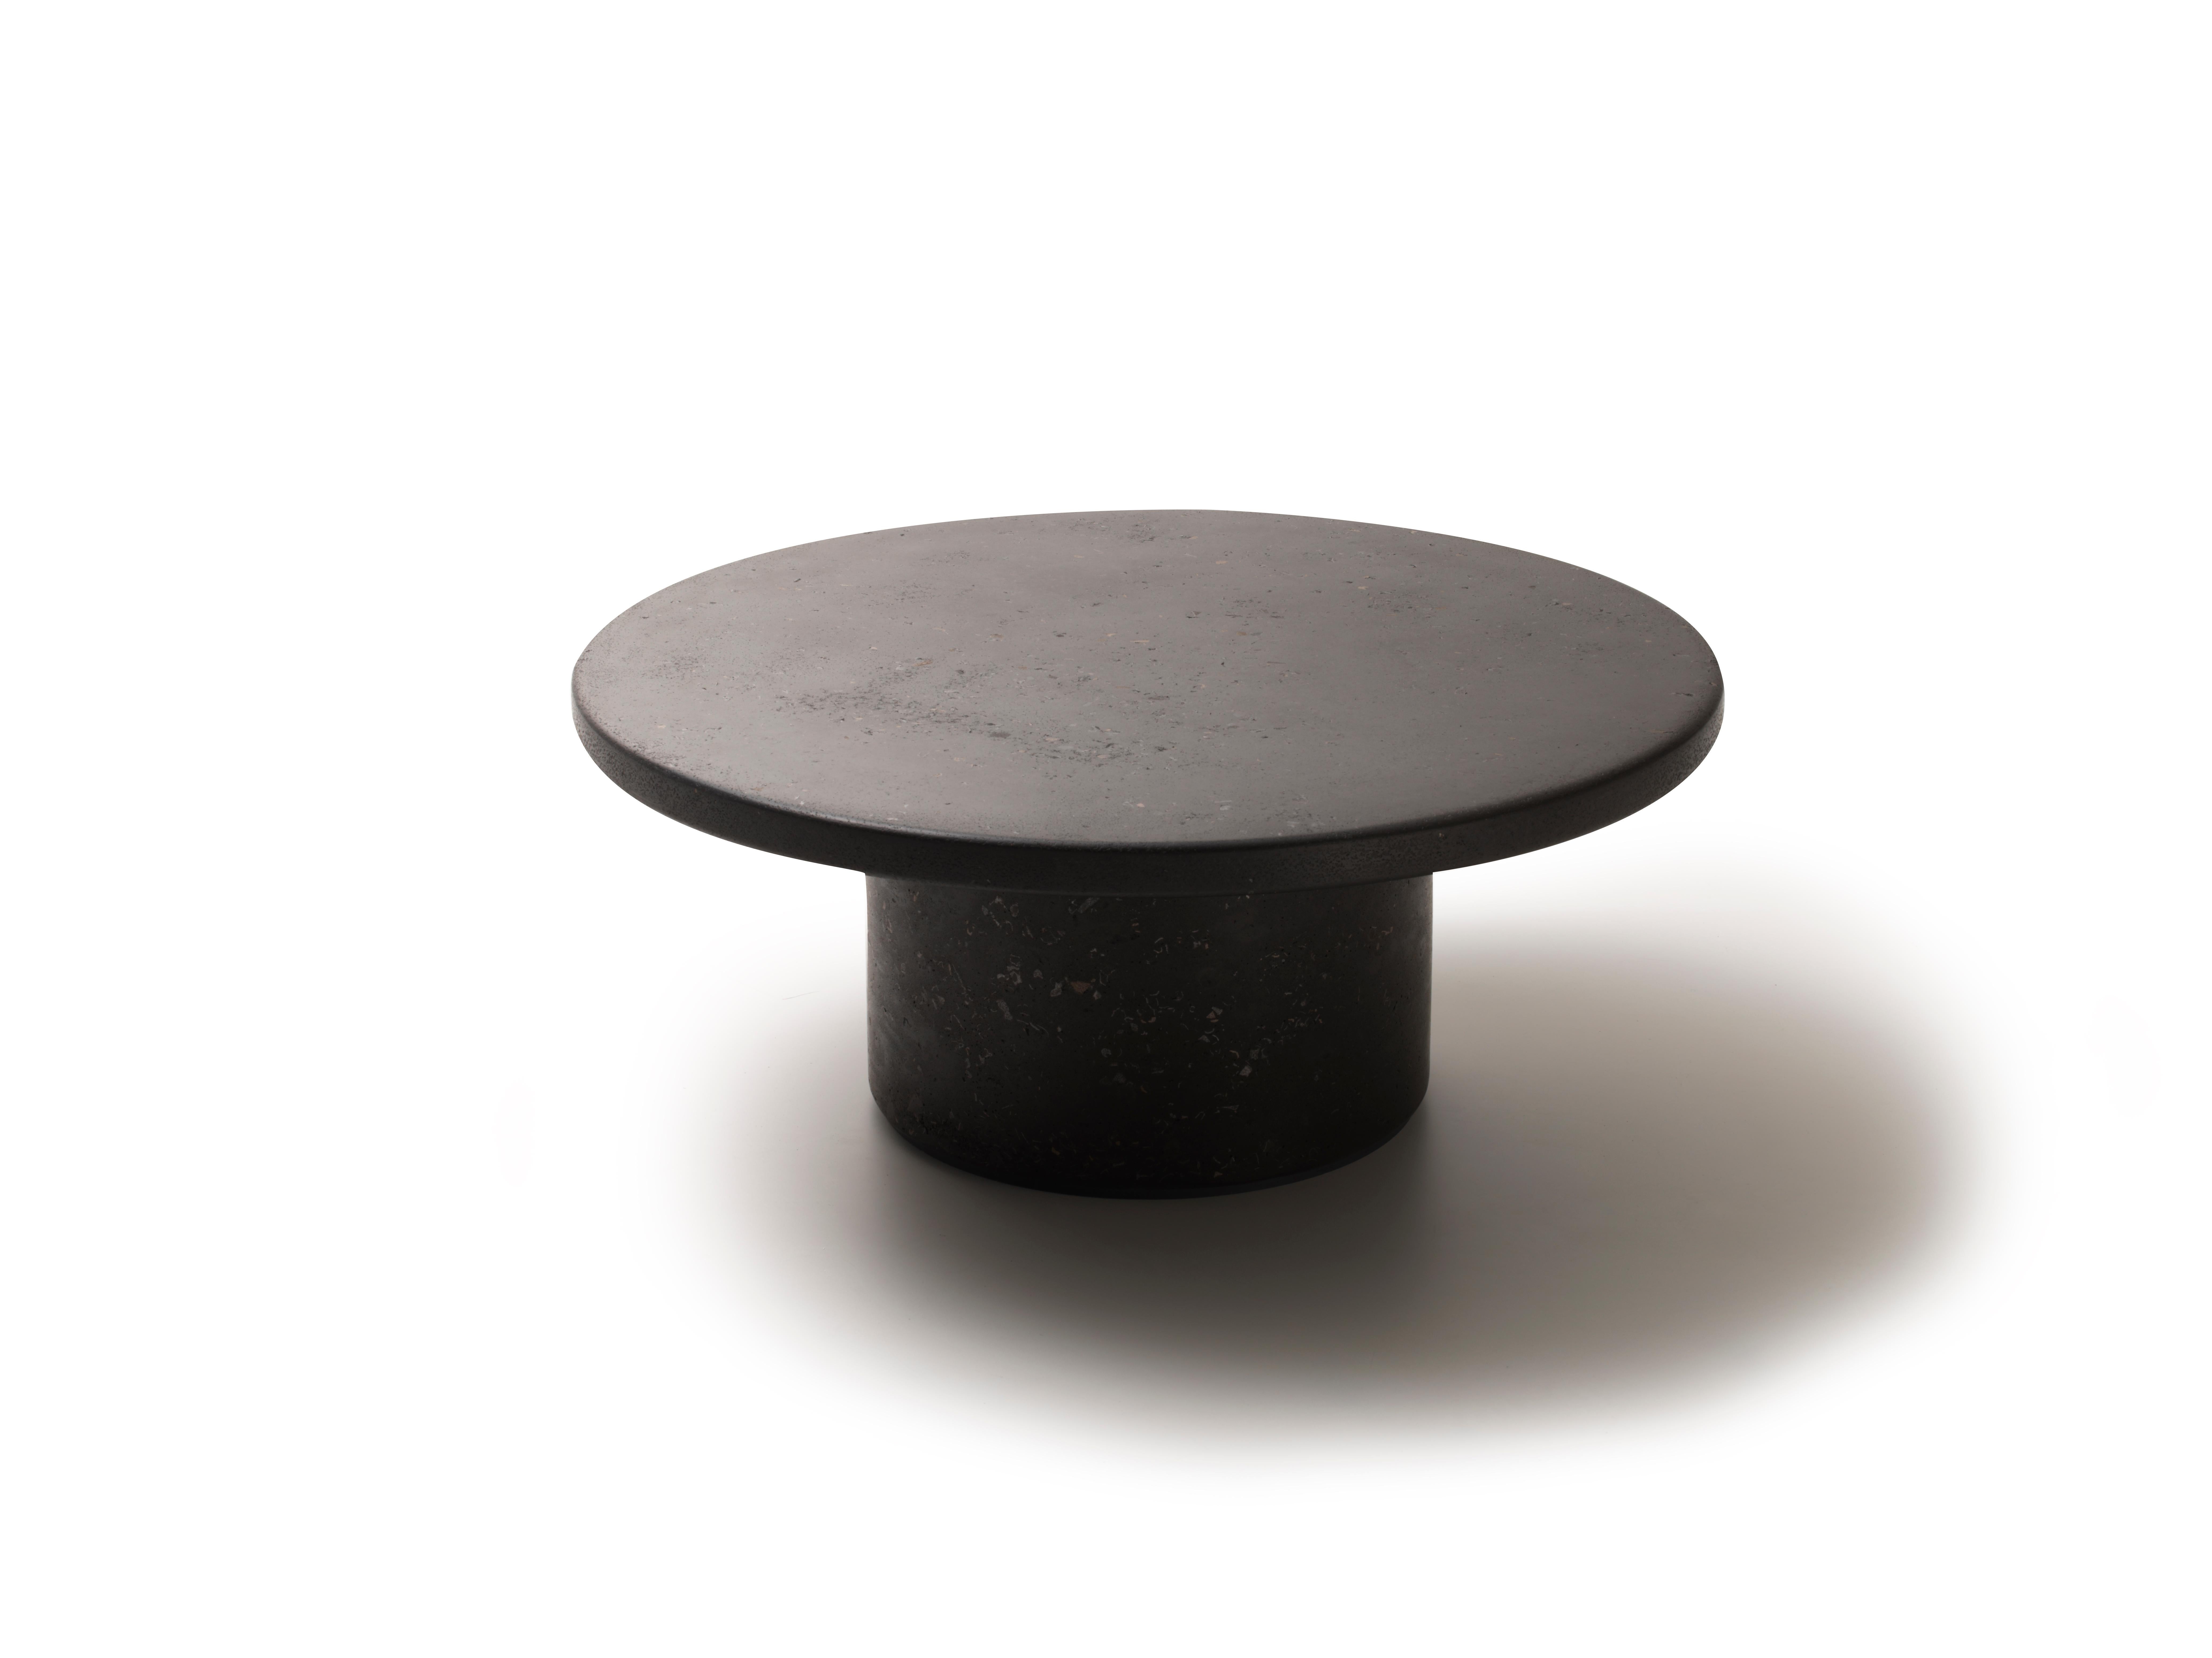 DS-612 coffee table by De Sede
Designer: Mario Ferrarini
Dimensions: 90 x 38 x 90 cm
Materials: mixtures of stone or metal; tabletop with MDF core. Column made of molded plywood.
Colours: metal brass, metal iron, marble Carrara, stone coral,